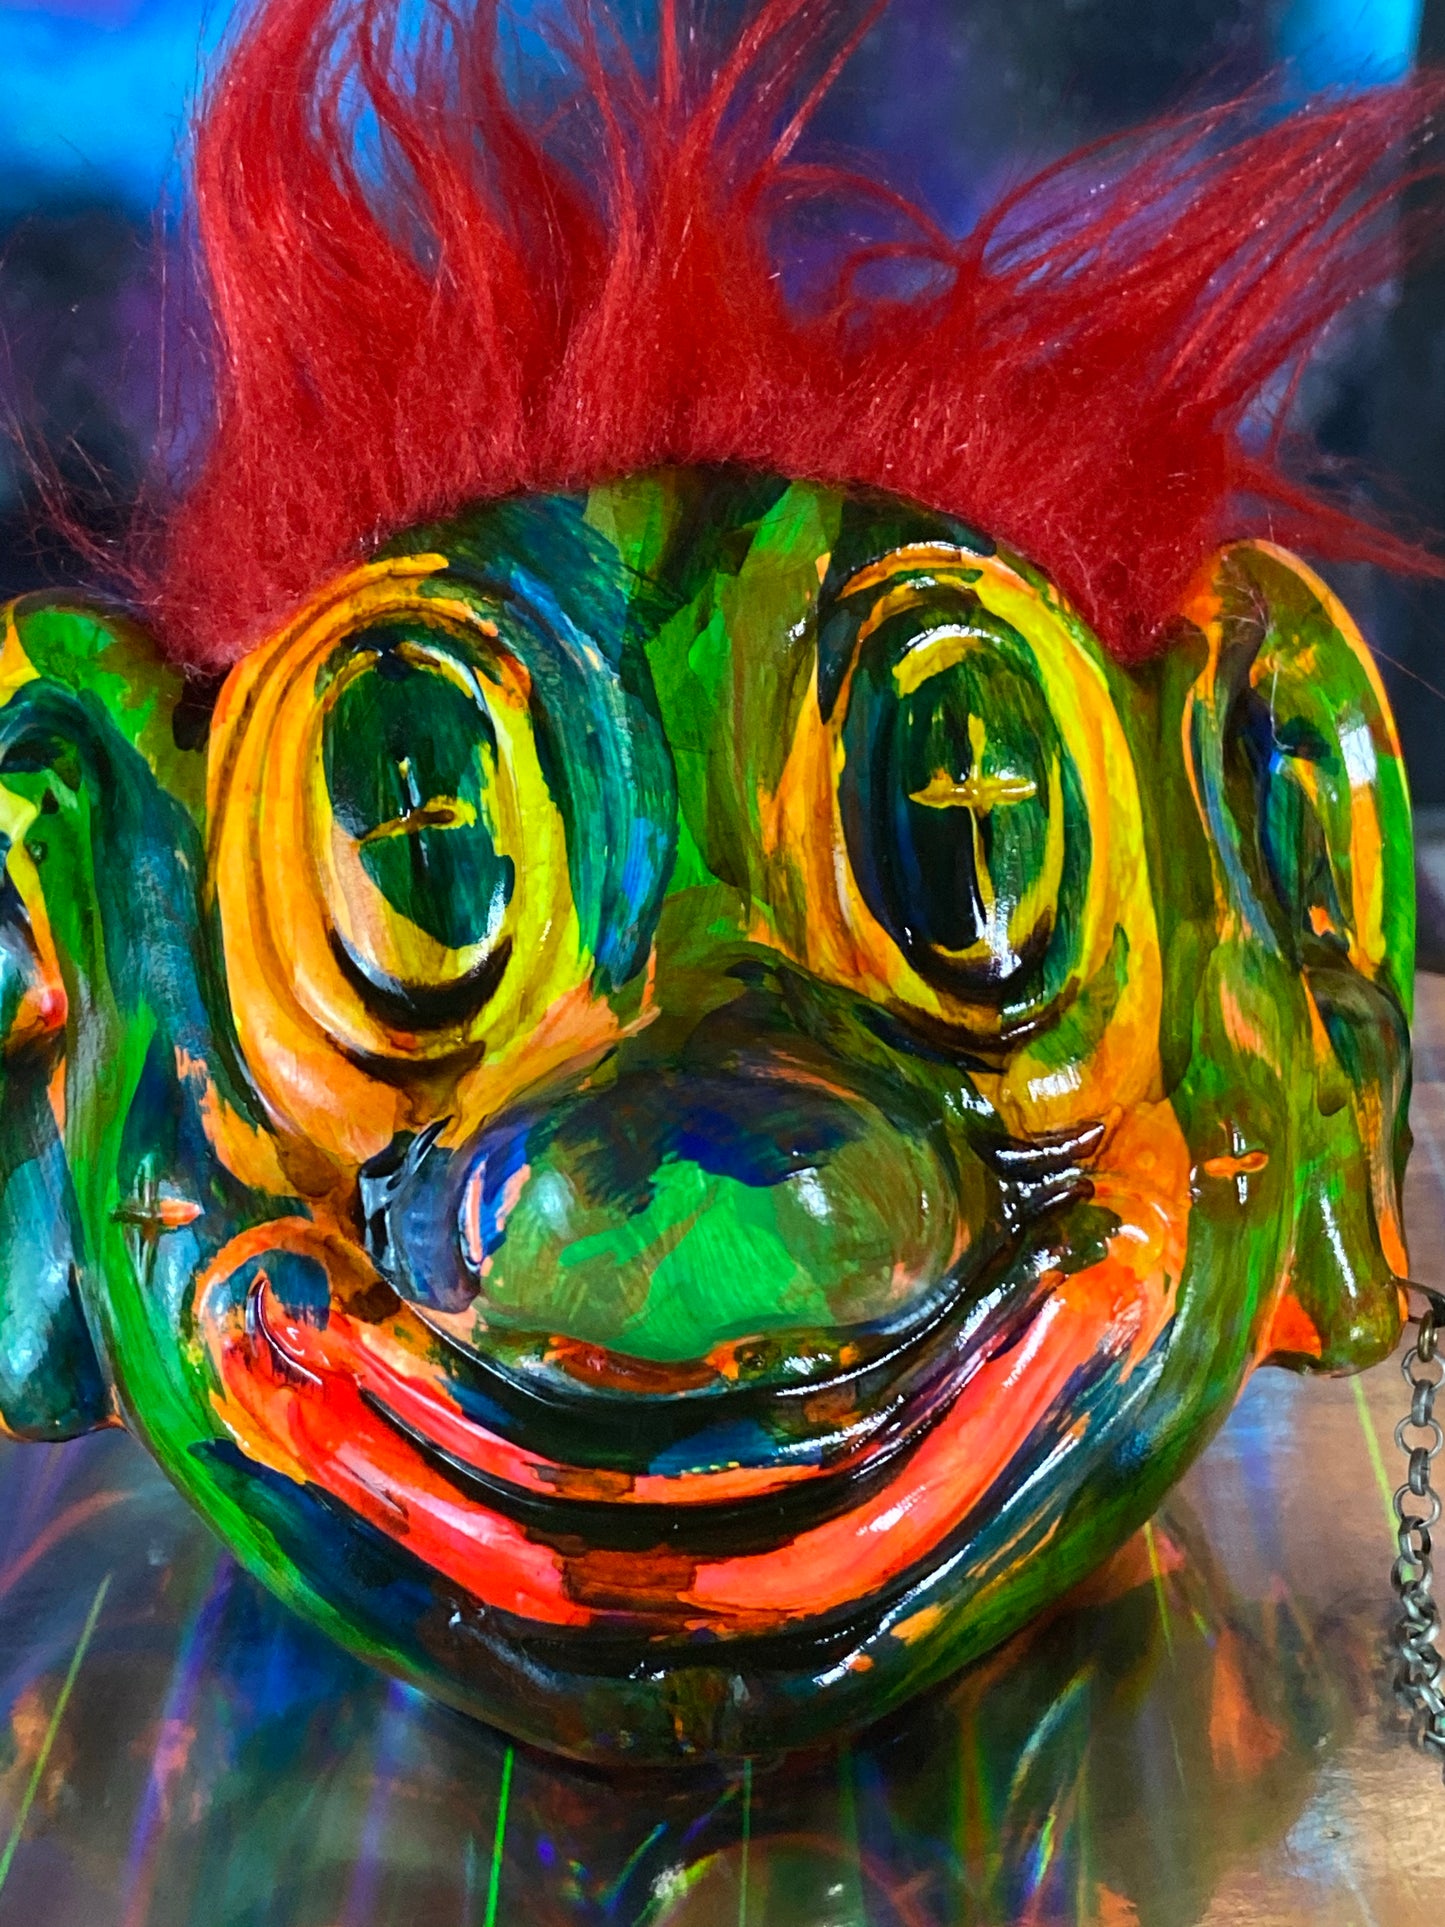 Red Hair Clown Chained to Two Snails